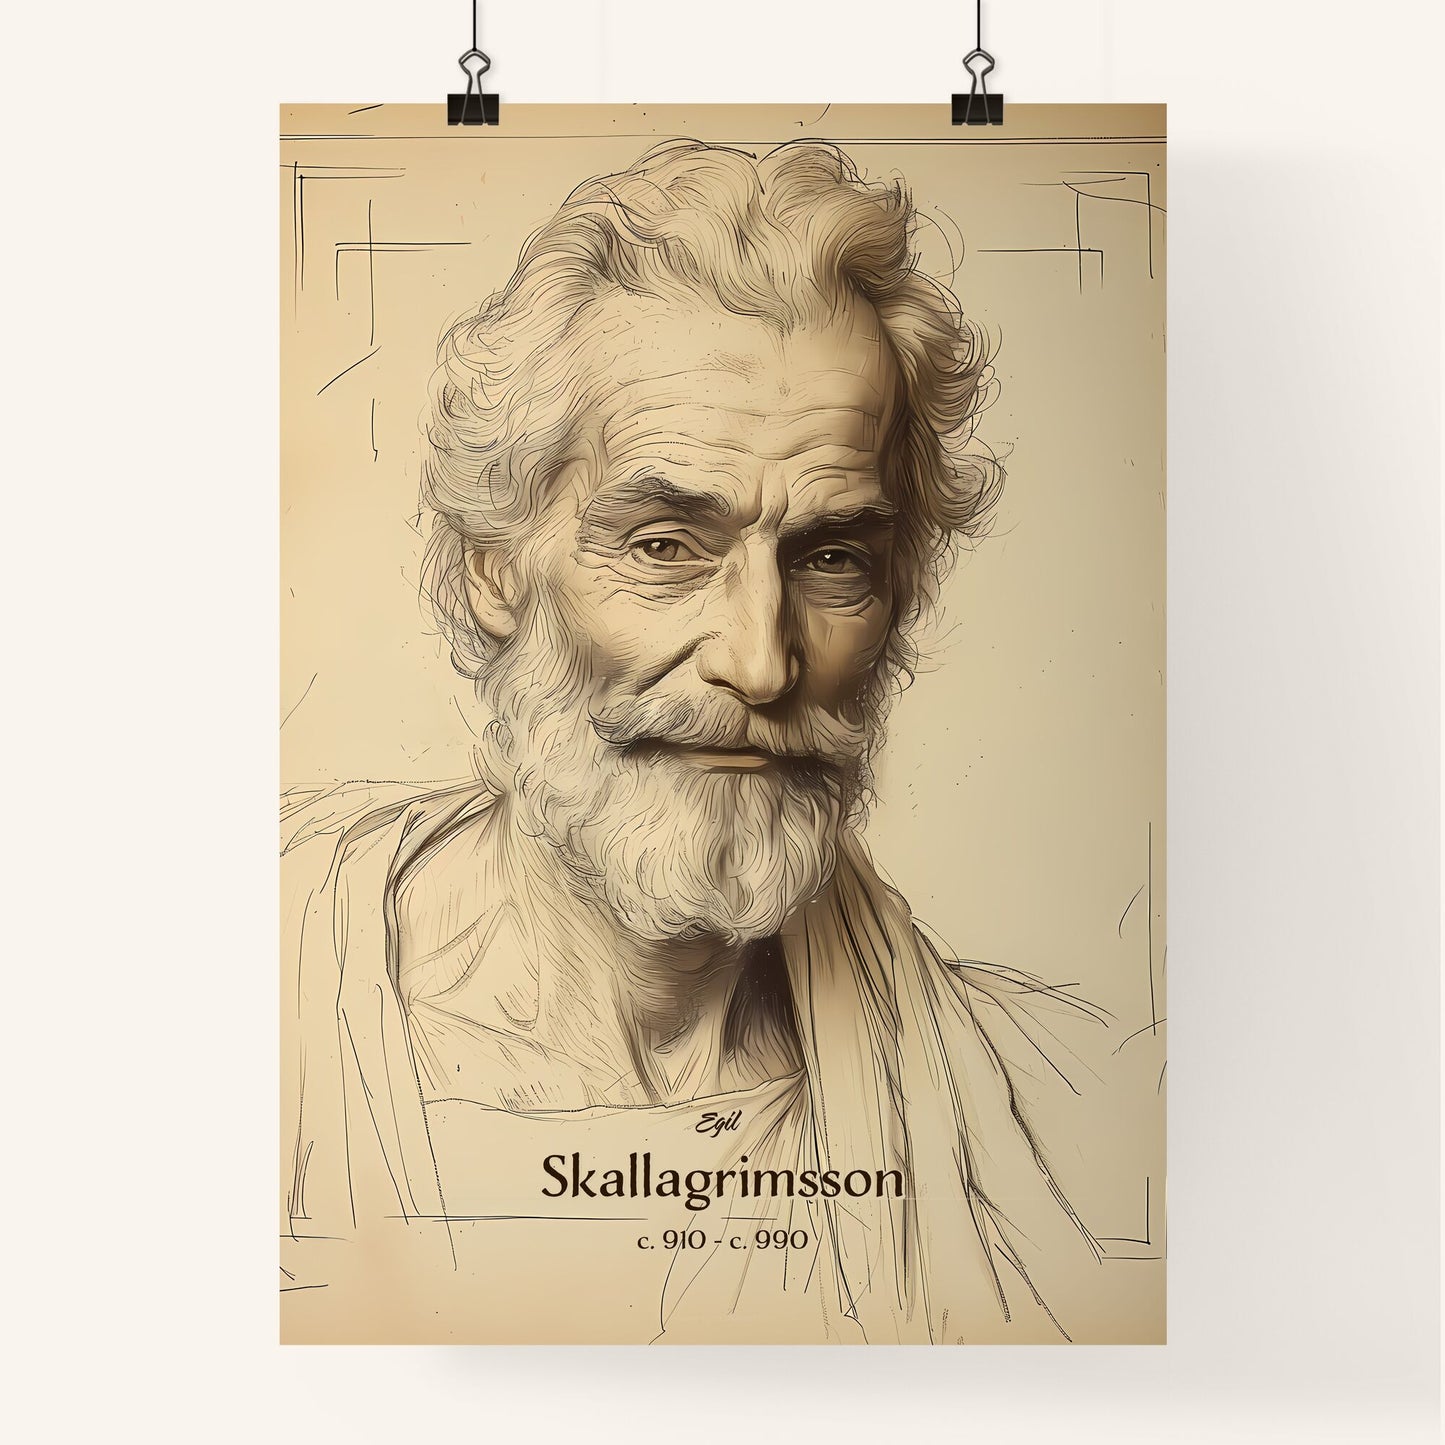 Egil, Skallagrimsson, c. 910 - c. 990, A Poster of a drawing of a man with a beard Default Title